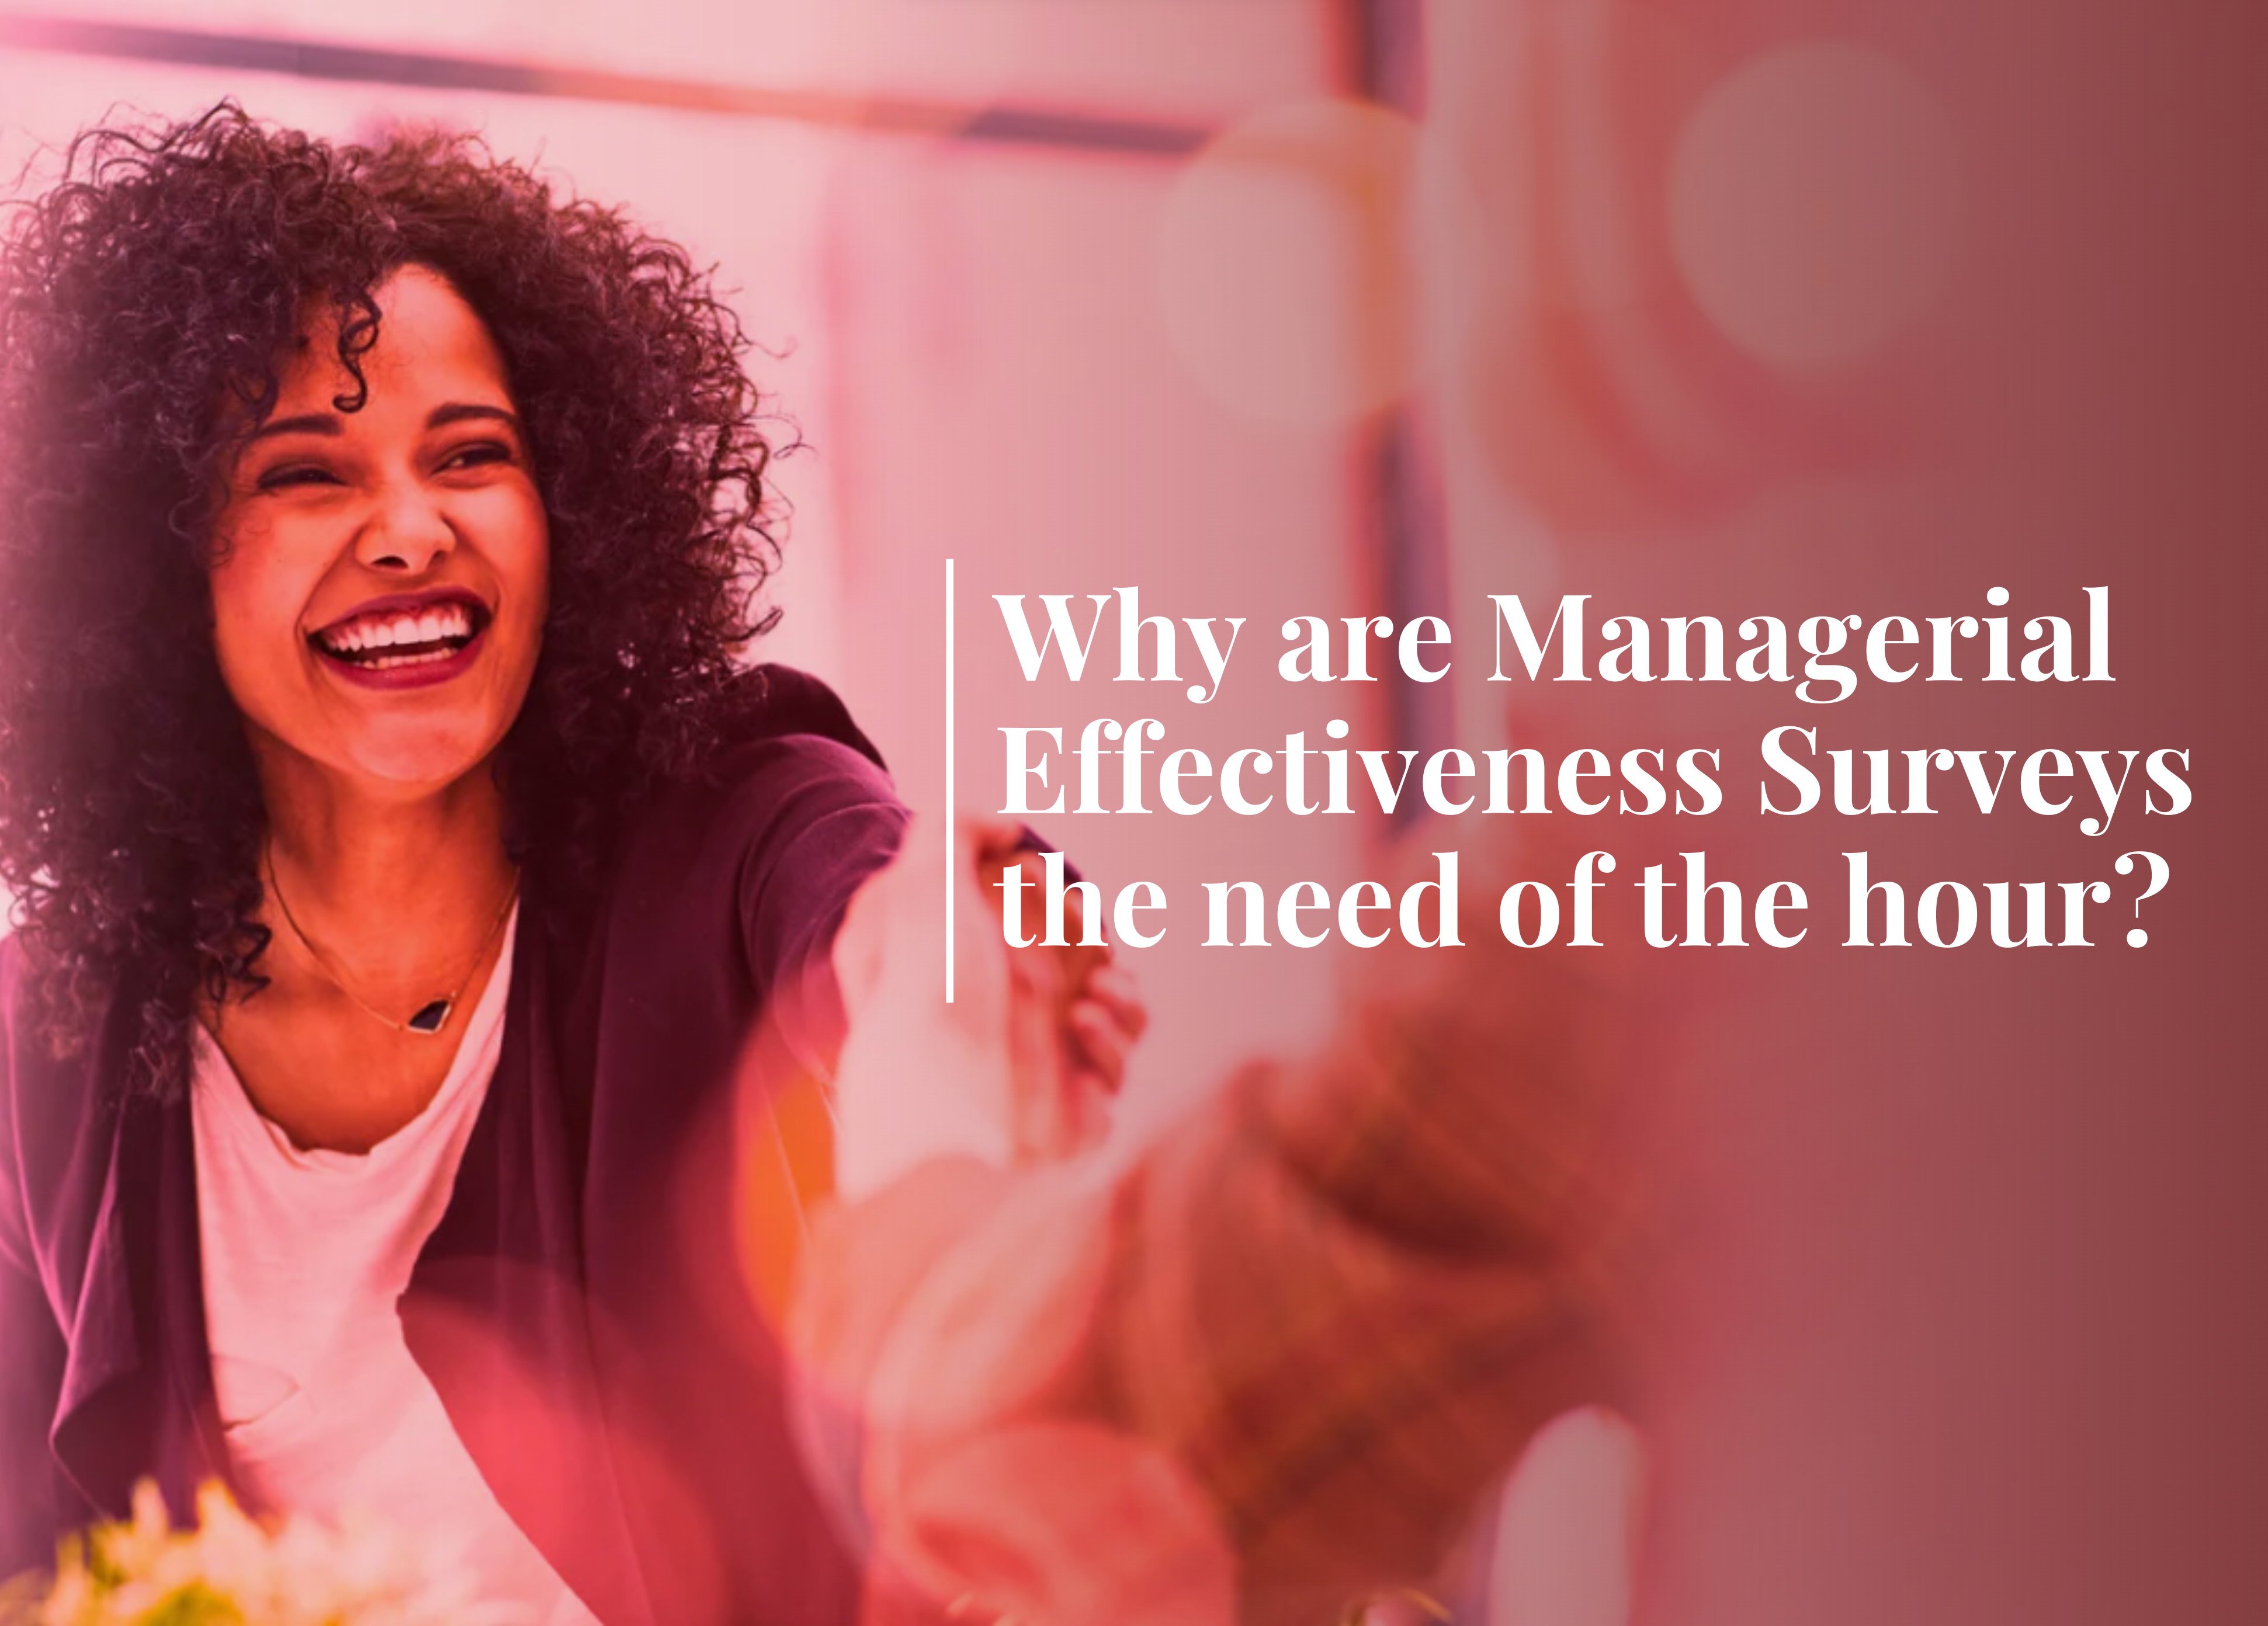 Why Managerial Effectiveness Surveys are the Need of the Hour